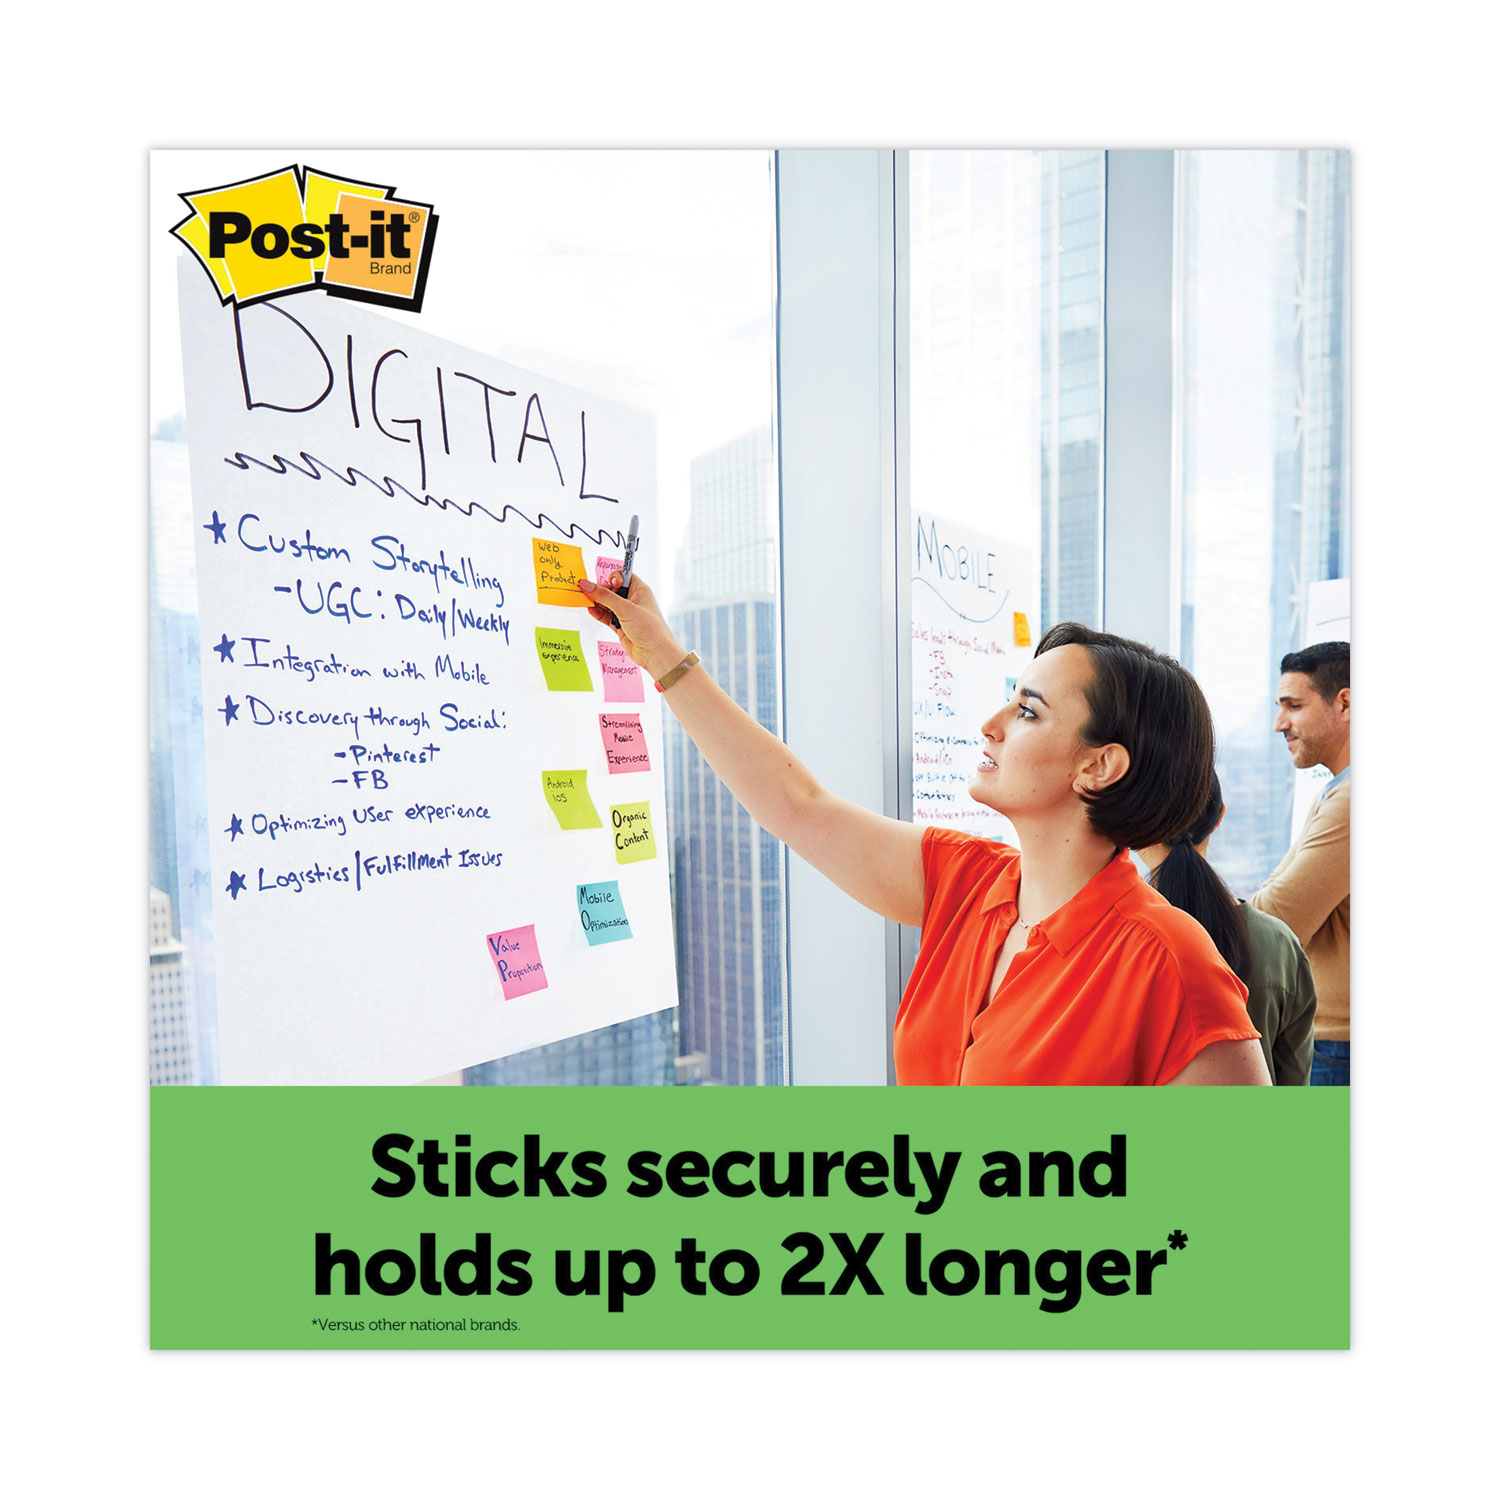 Vertical-Orientation Self-Stick Easel Pads, Green Headband, Unruled, 25 x  30, White, 30 Sheets, 2/Carton - Office Express Office Products